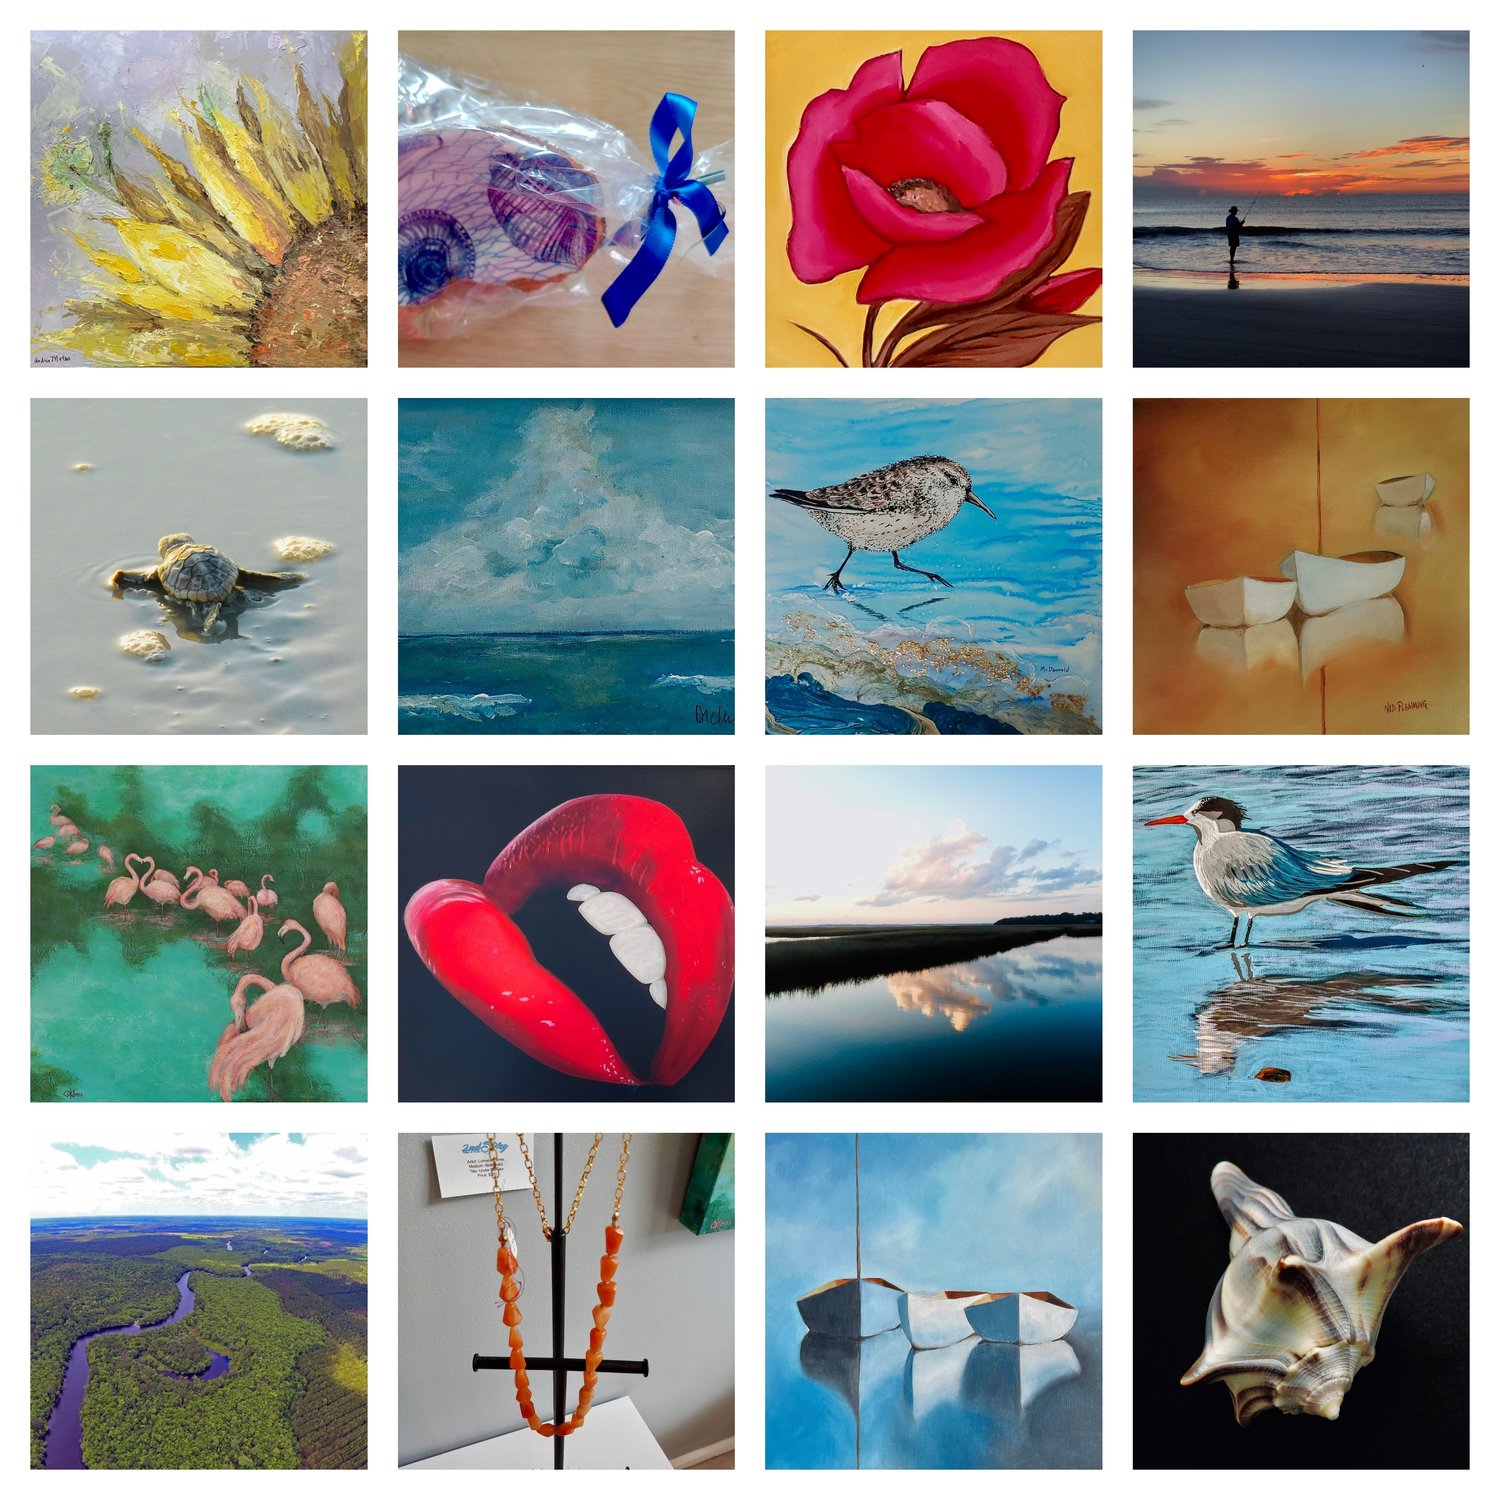 A collection of some of the art that can be found at 2nd Story Gallery & Studios in Fernandina Beach.